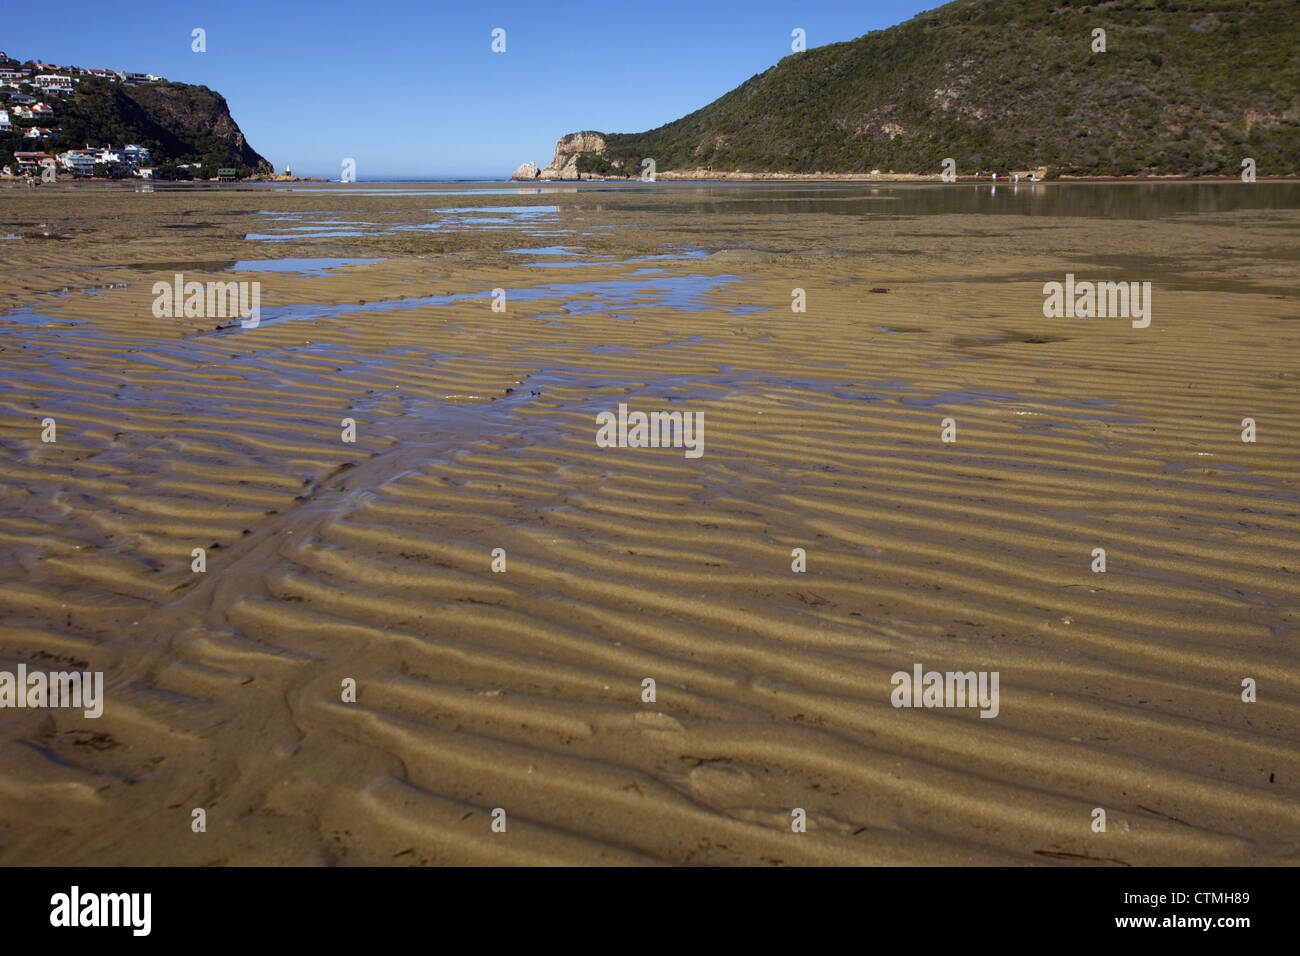 A low angle view of the Knysna Lagoon, Western Cape, South Africa Stock Photo